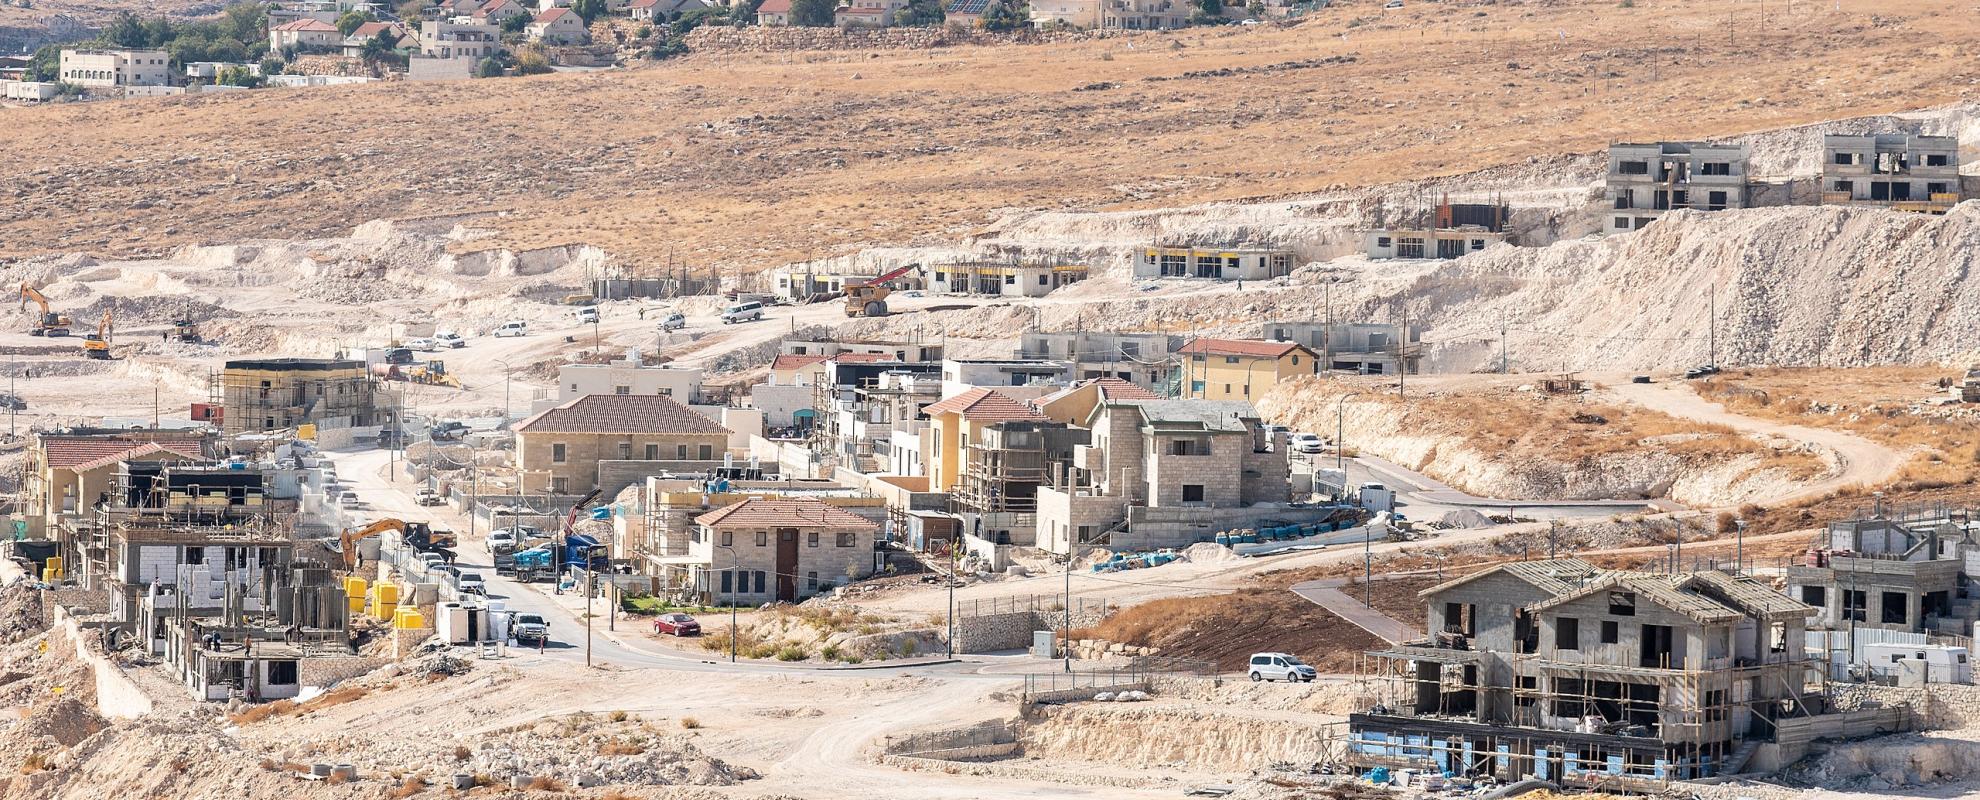 New houses being constructed at the Israeli settlement of Eldad, south of Bethlehem in the West Bank. Settlements are illegal under international law.